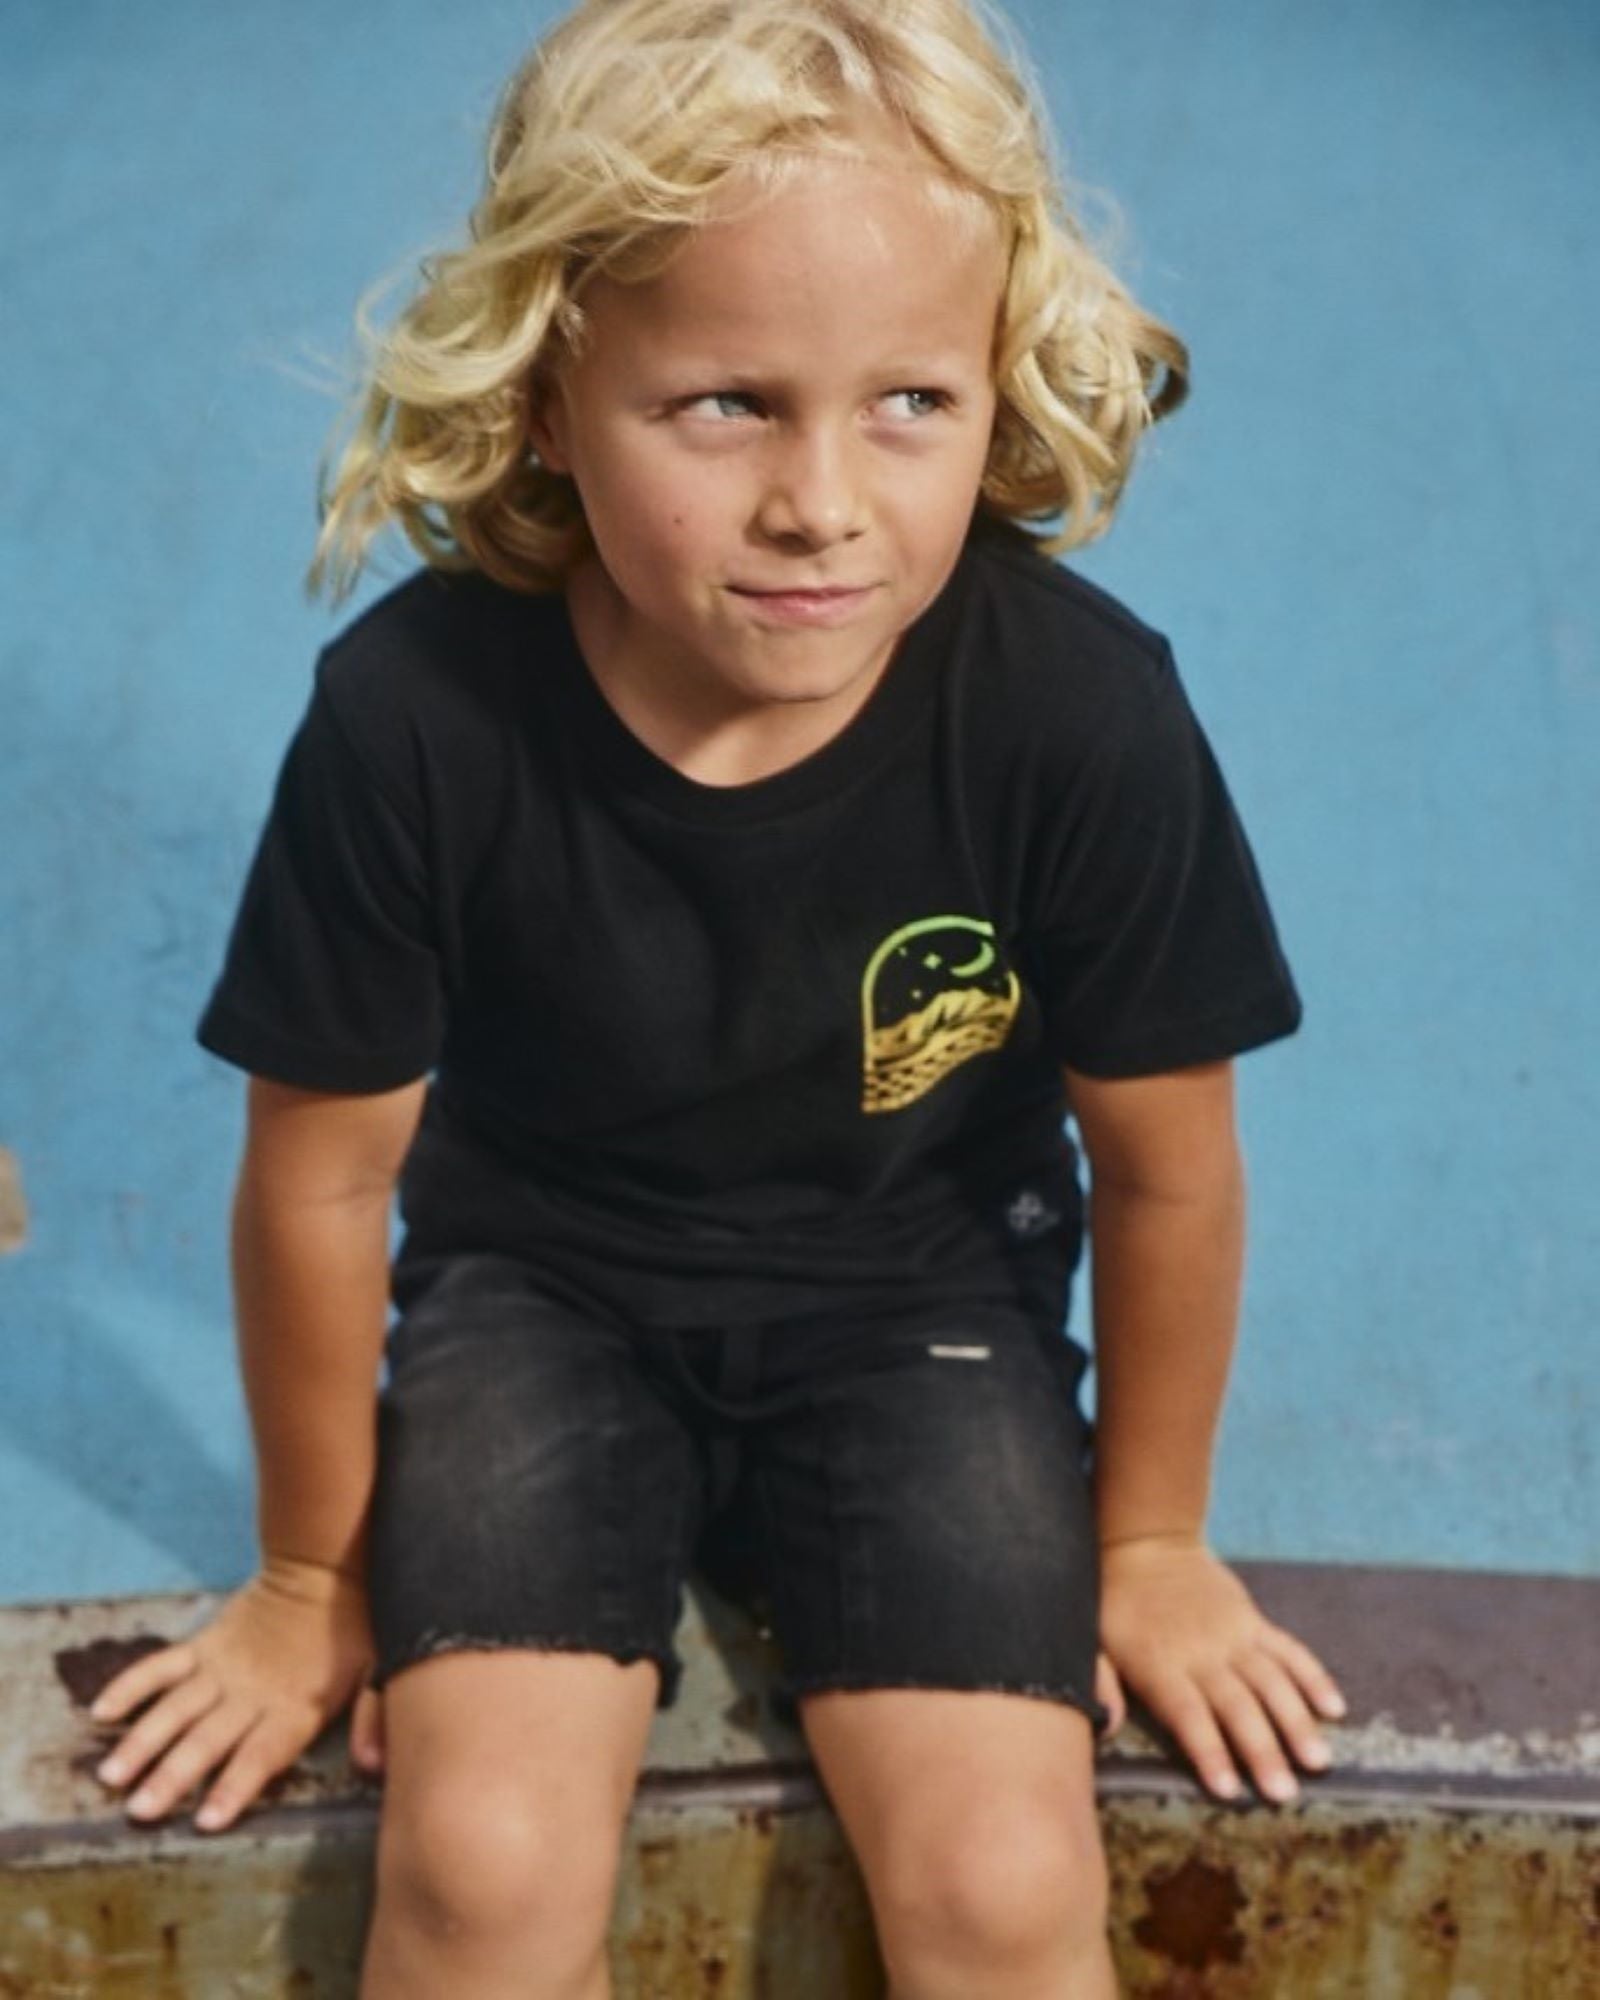 Alphabet Soup's Teen Mystical Tee in washed black cotton jersey for boys ages 2-7. Featuring a rad print “Take The Road Less Travelled” design on front and back, short sleeves, crew neck, and straight hemline.